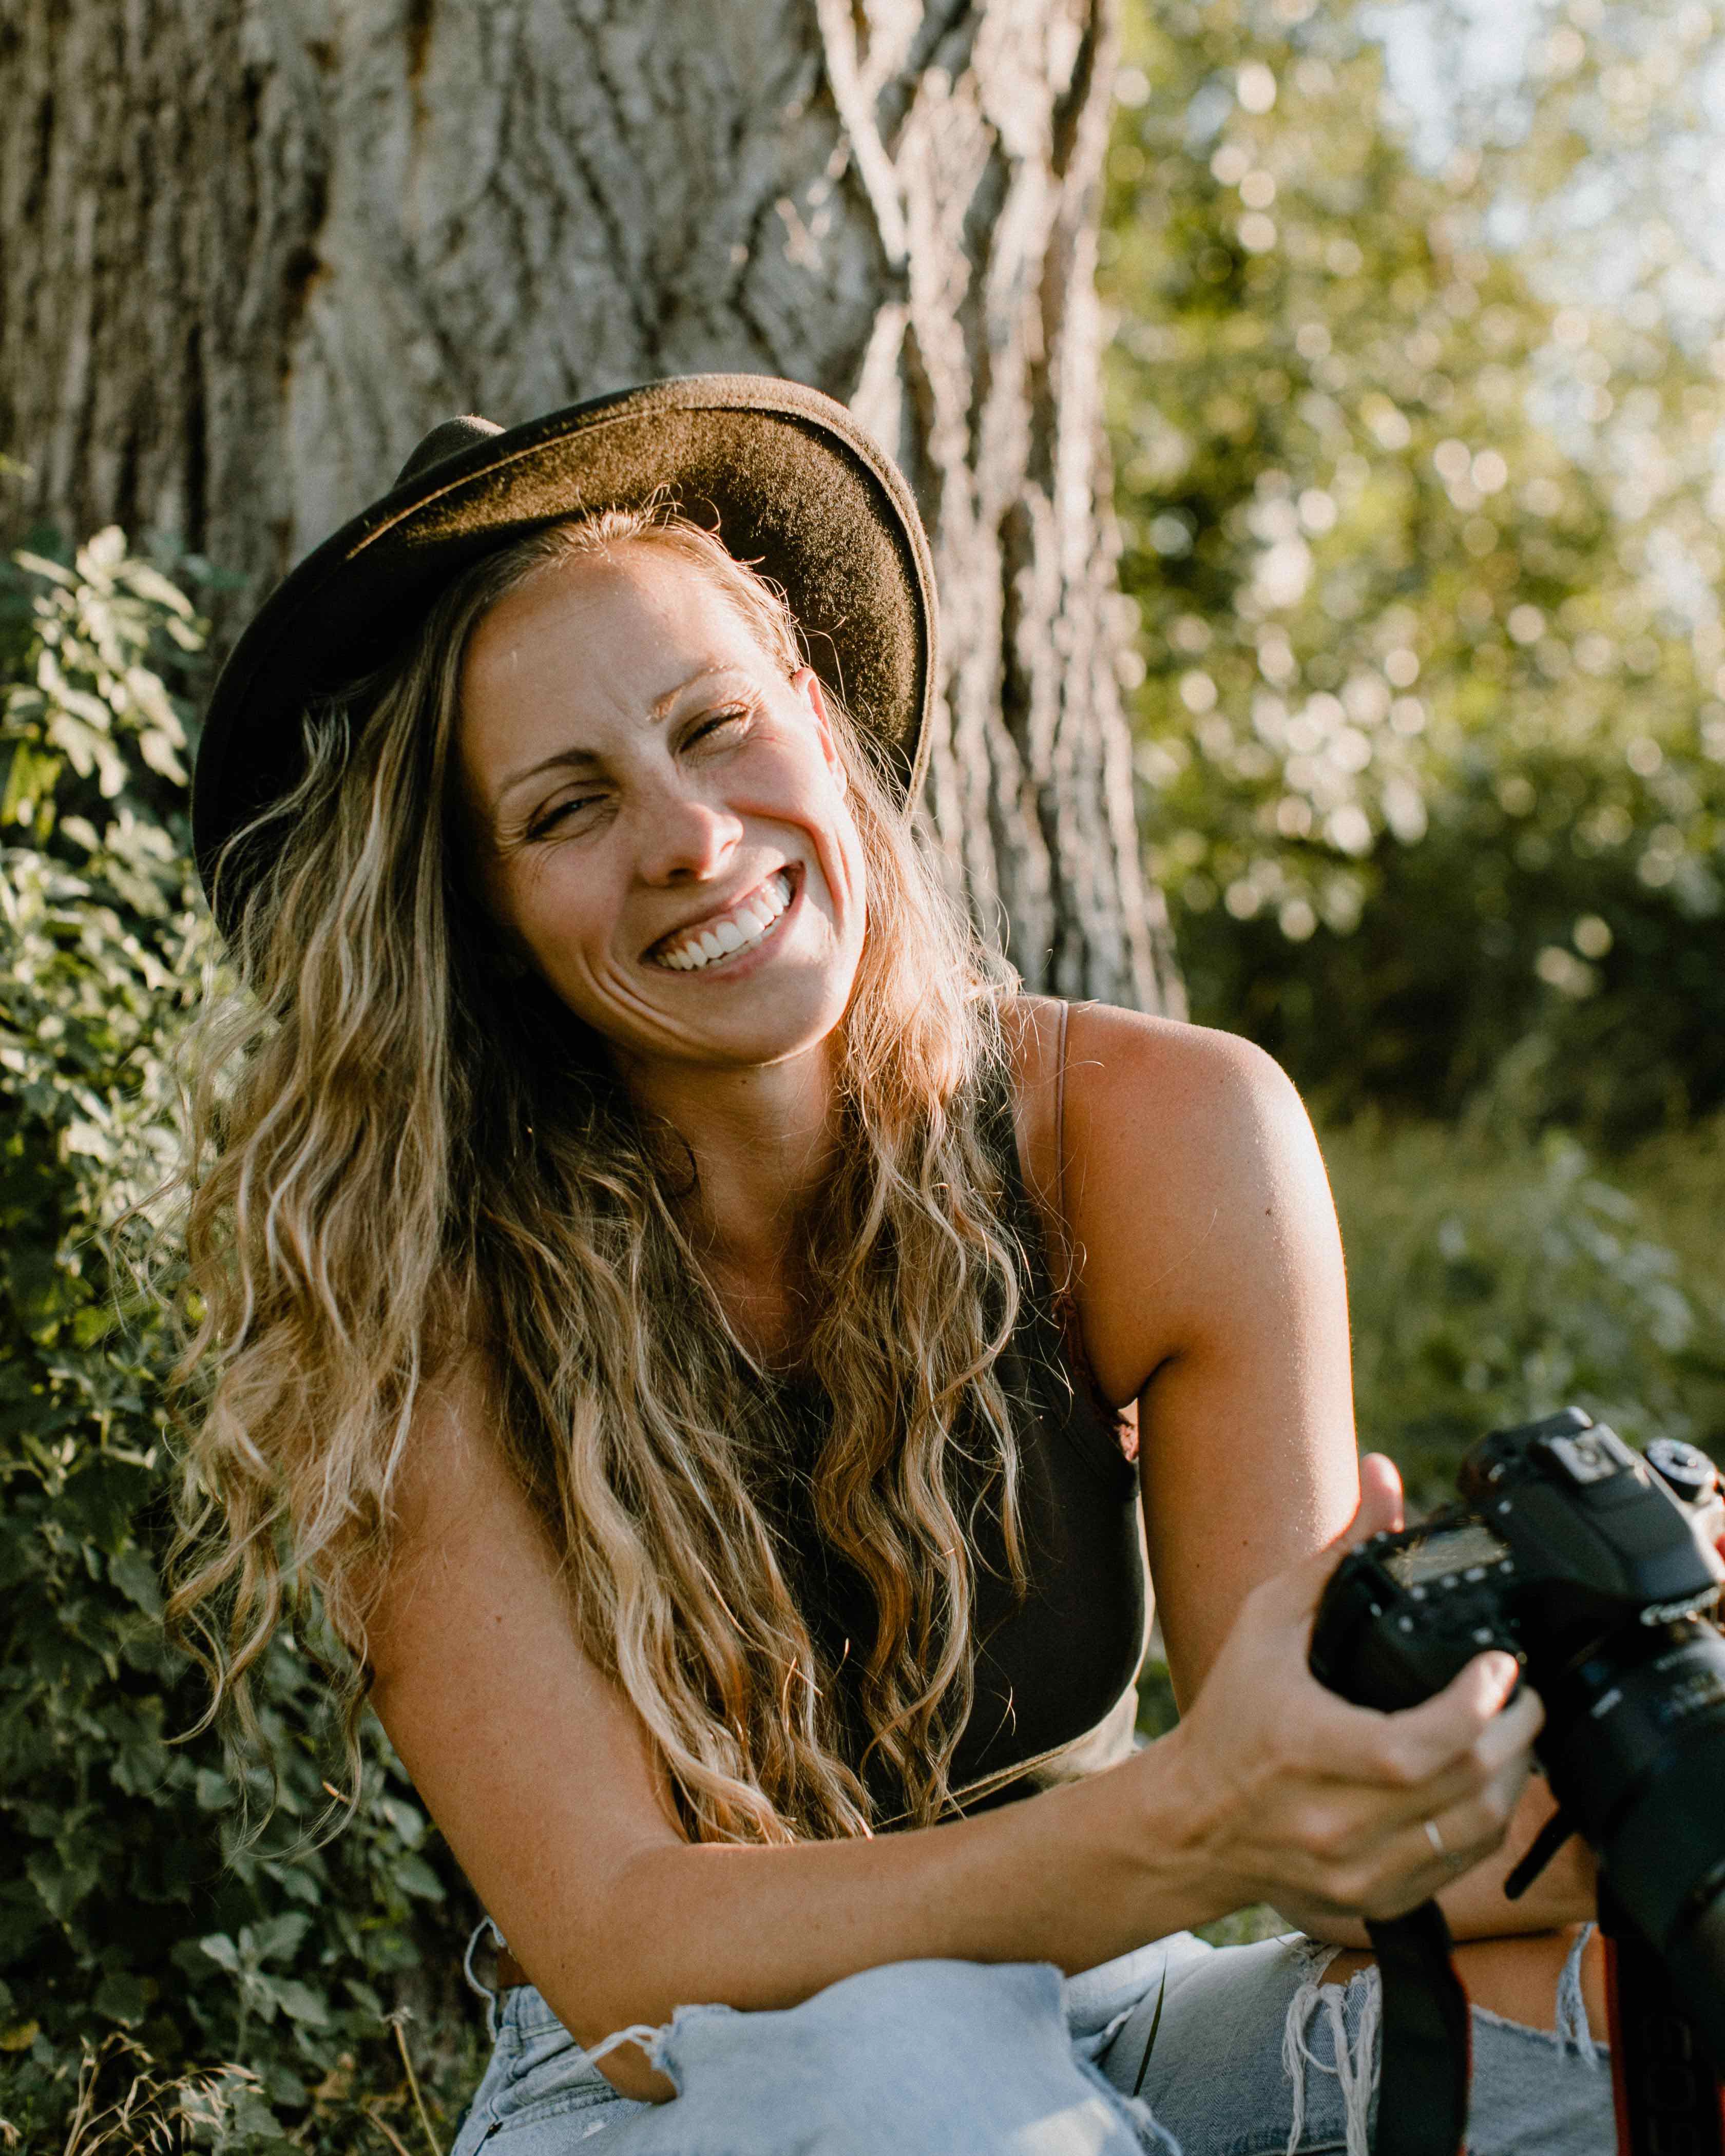 Woman is smiling while laughing and holding a camera. She is sitting down with her back against a tree and the setting sun is highlighting the side of her face and hair.